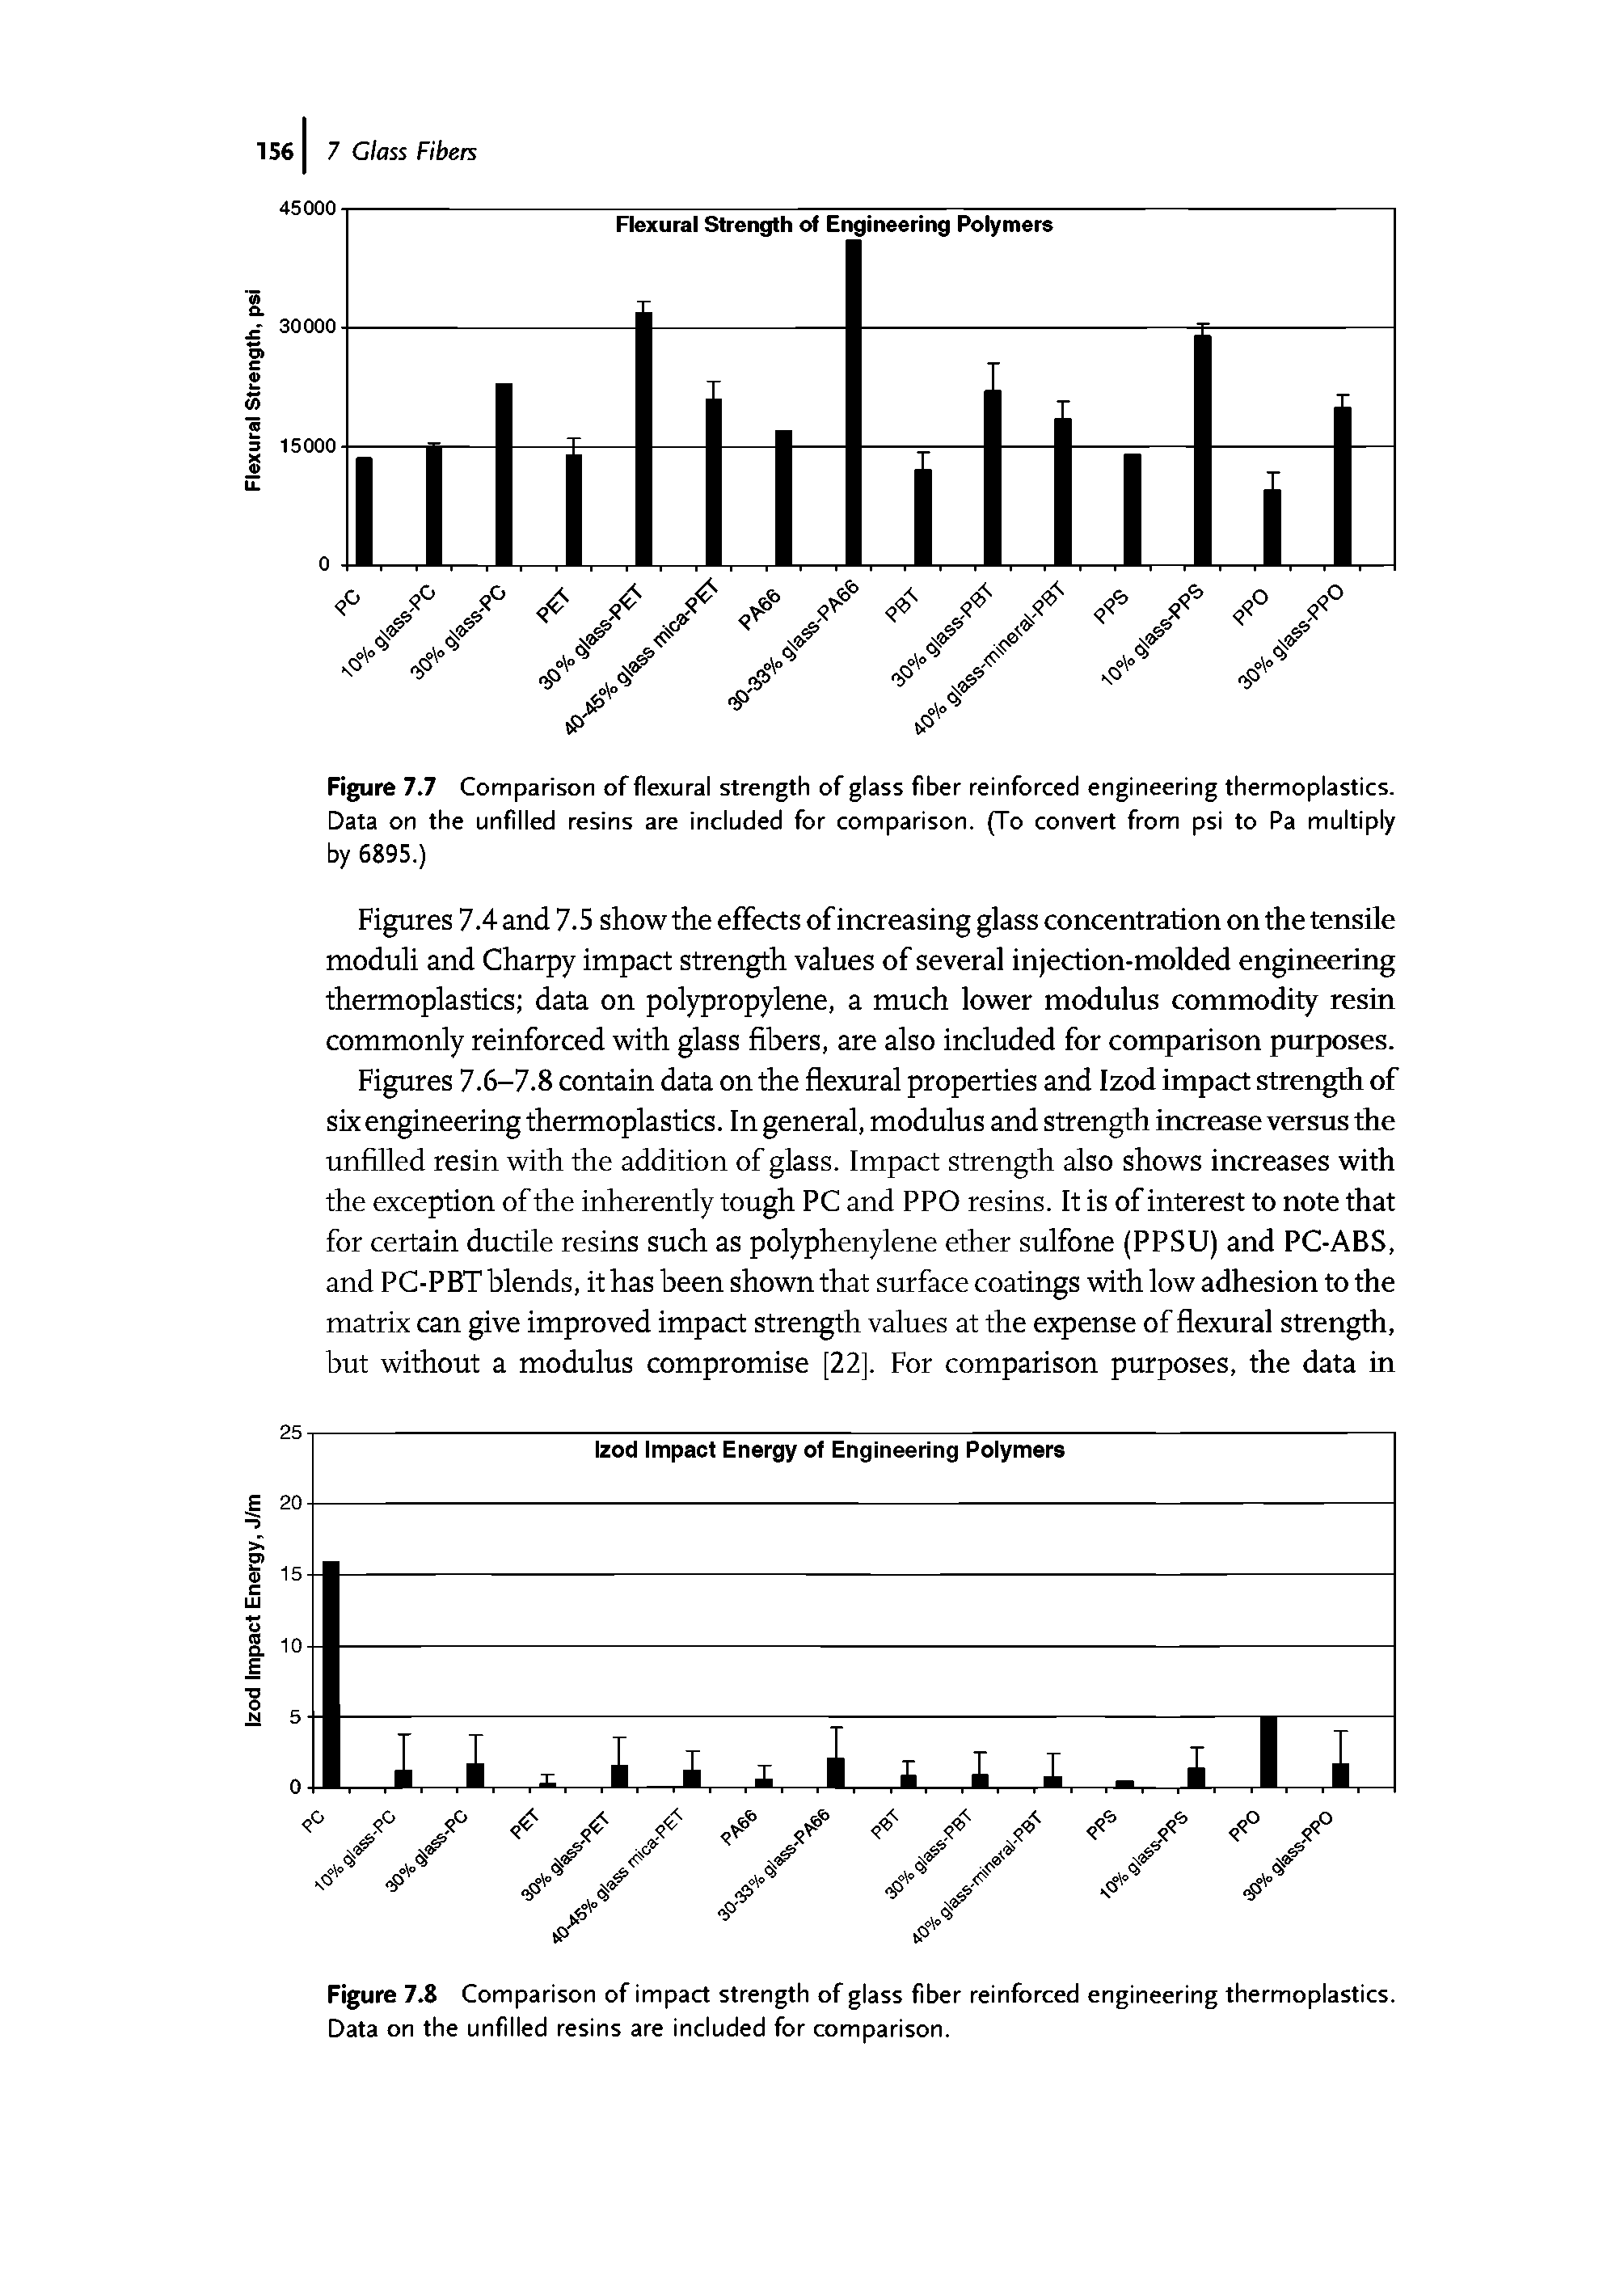 Figure 7.8 Comparison of impact strength of glass fiber reinforced engineering thermoplastics. Data on the unfilled resins are included for comparison.